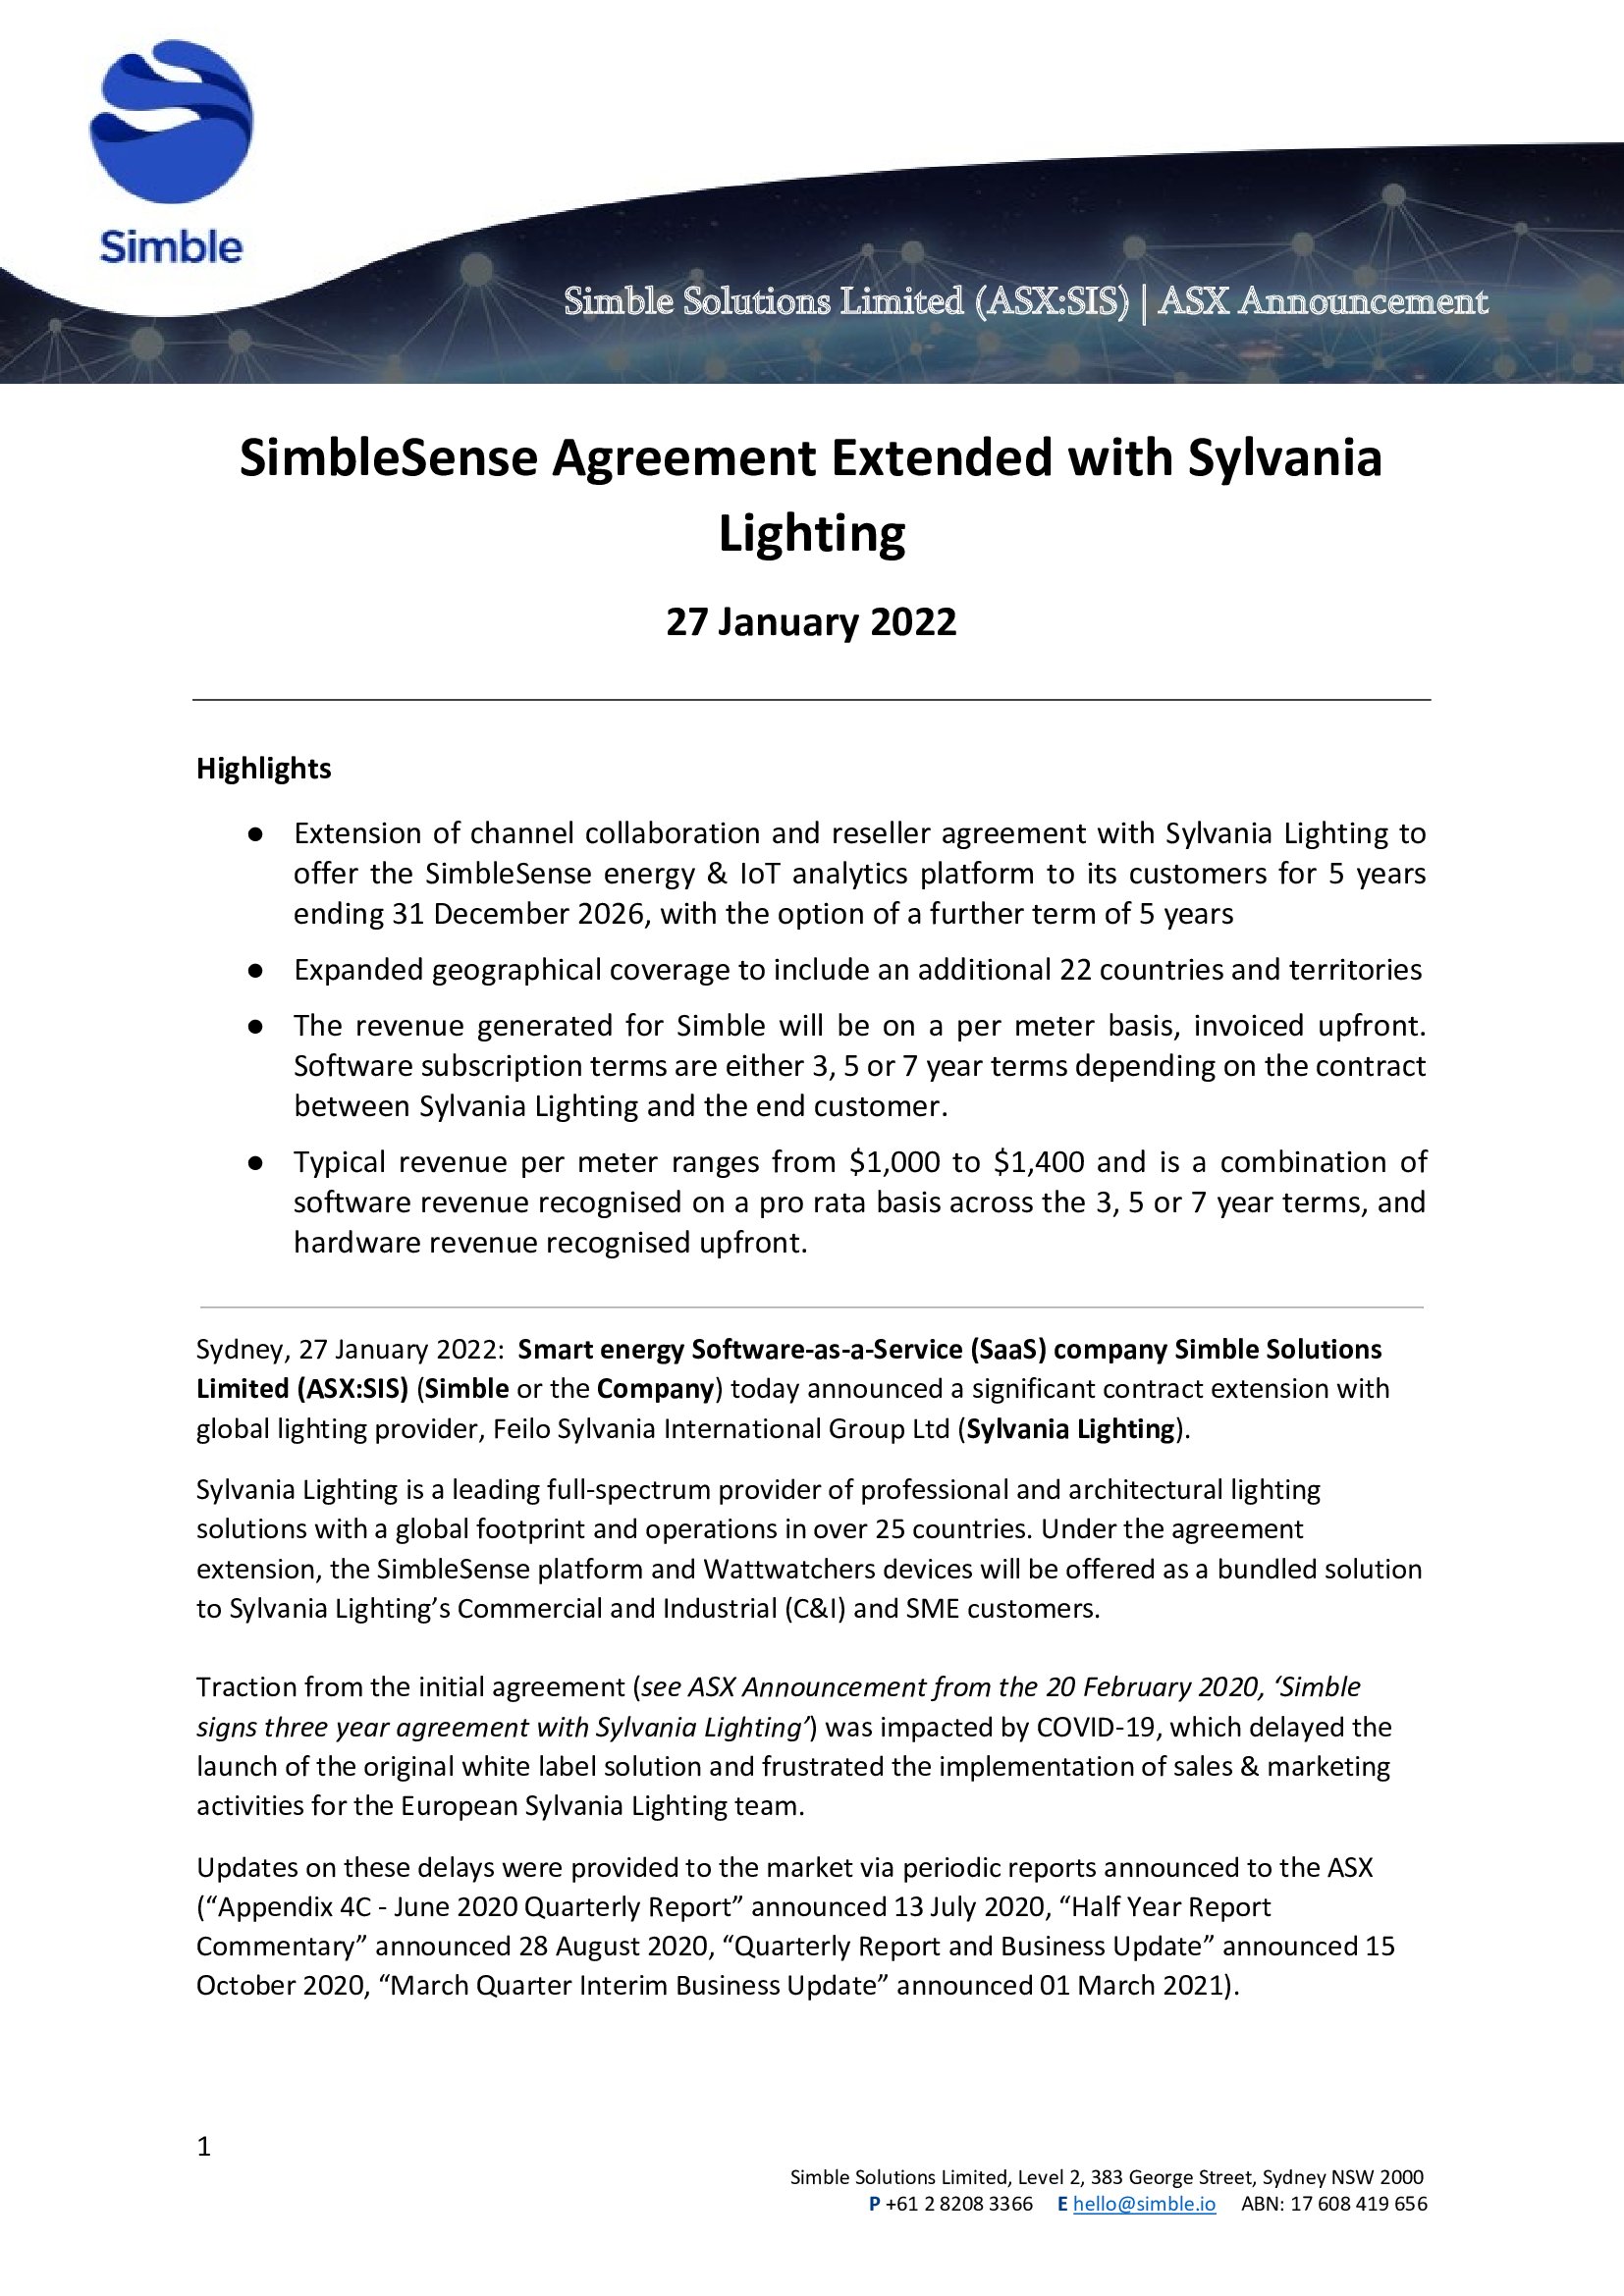 Simble Solutions Limited ASX: SIS Twitter: just released the following announcement to the market: Sylvania Lighting Agreement Extension Full announcement at https://t.co/i9TWyBnRJT https://t.co/sie0lqUeik" / Twitter